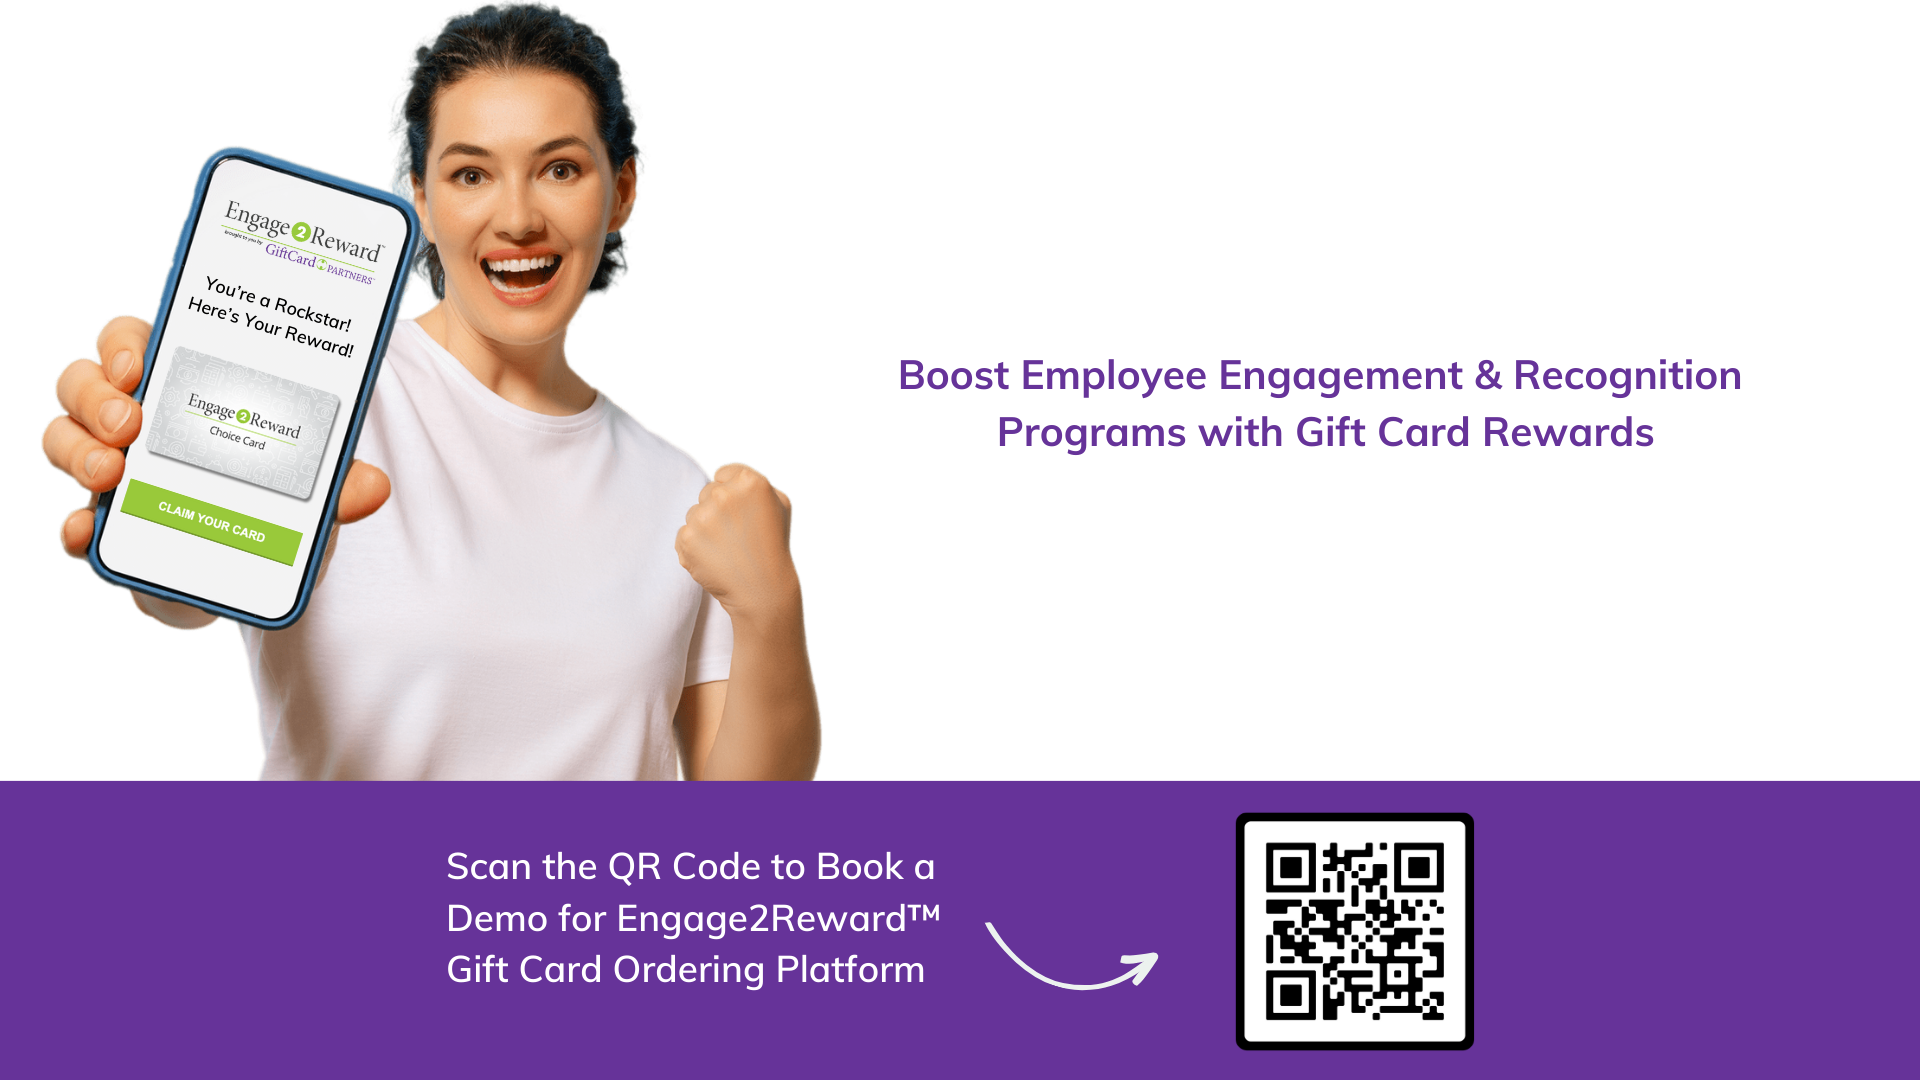 Why Gift Cards Make the Best Employee Rewards